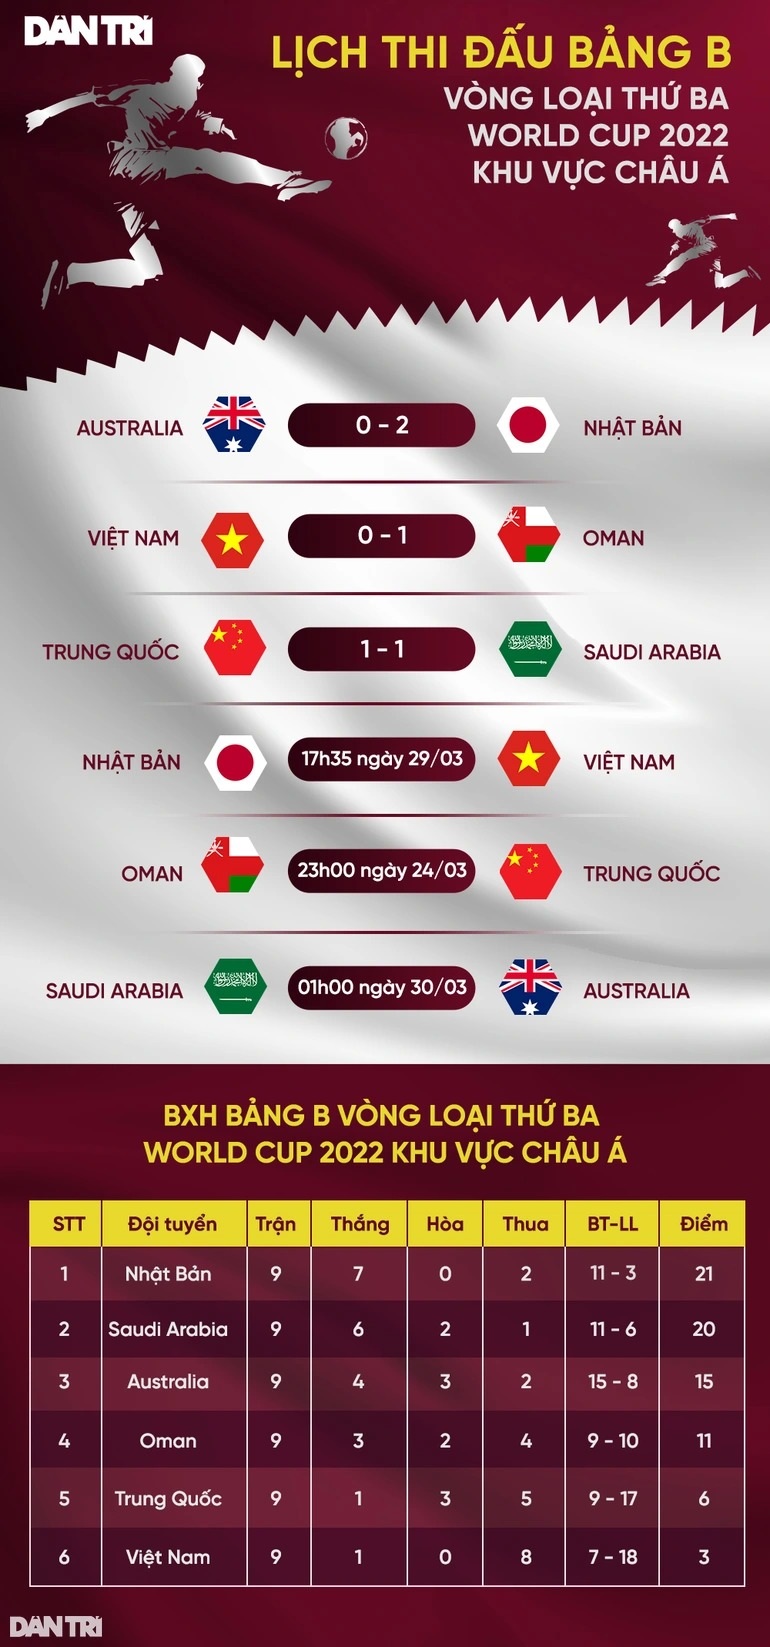 The Vietnamese team played well, only lost to Oman because of distraction - 4